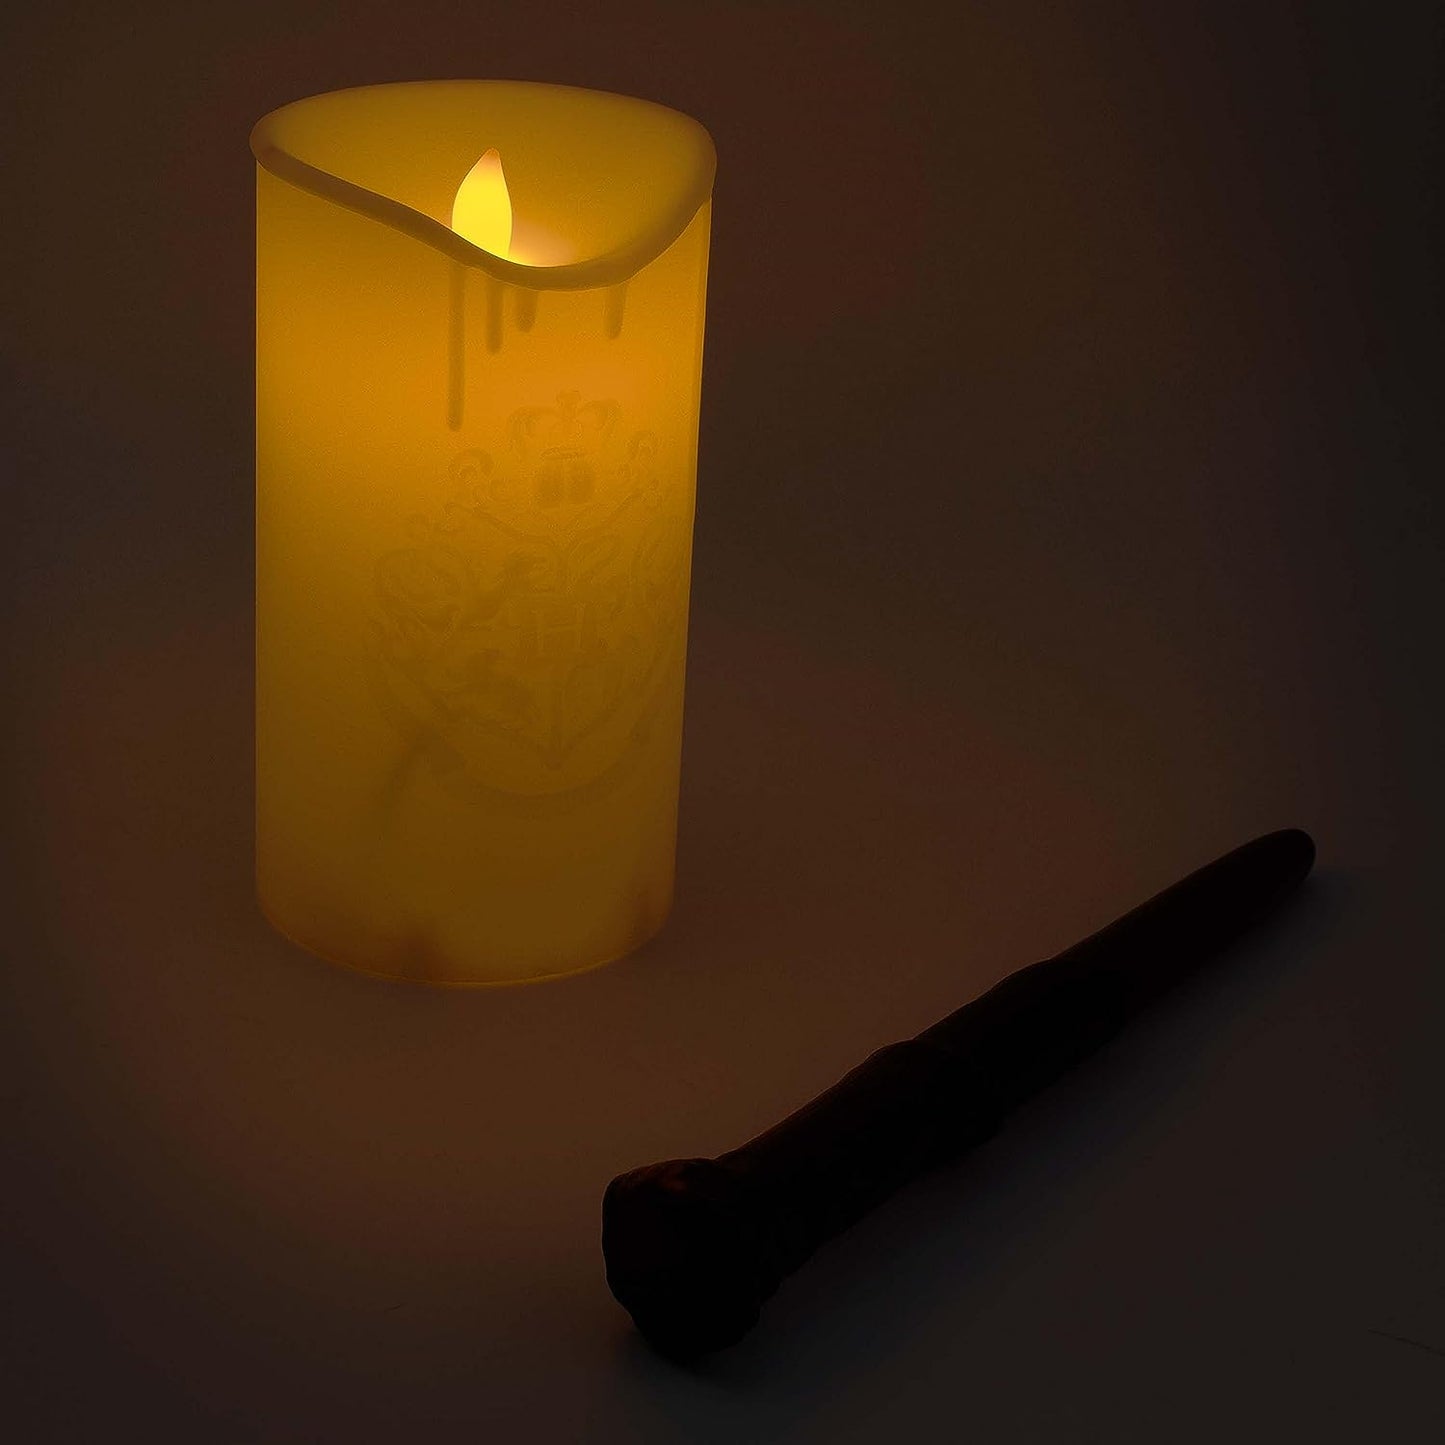 Candle Light With Wand Remote